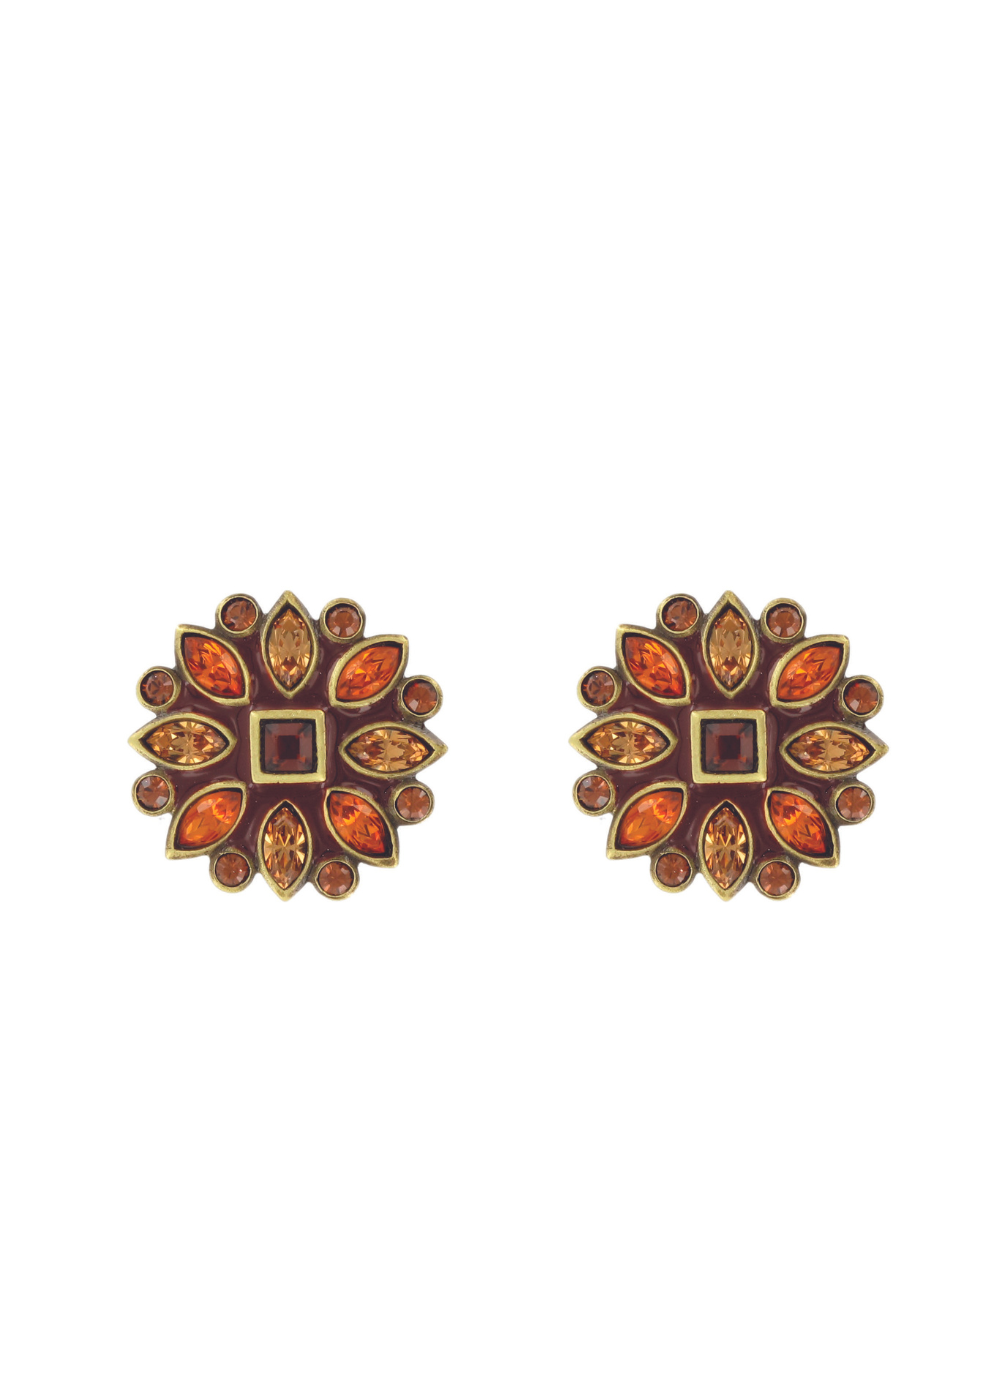 Myka - Antique Brass Enameled Floral Post Earrings with Swarovski Crystals